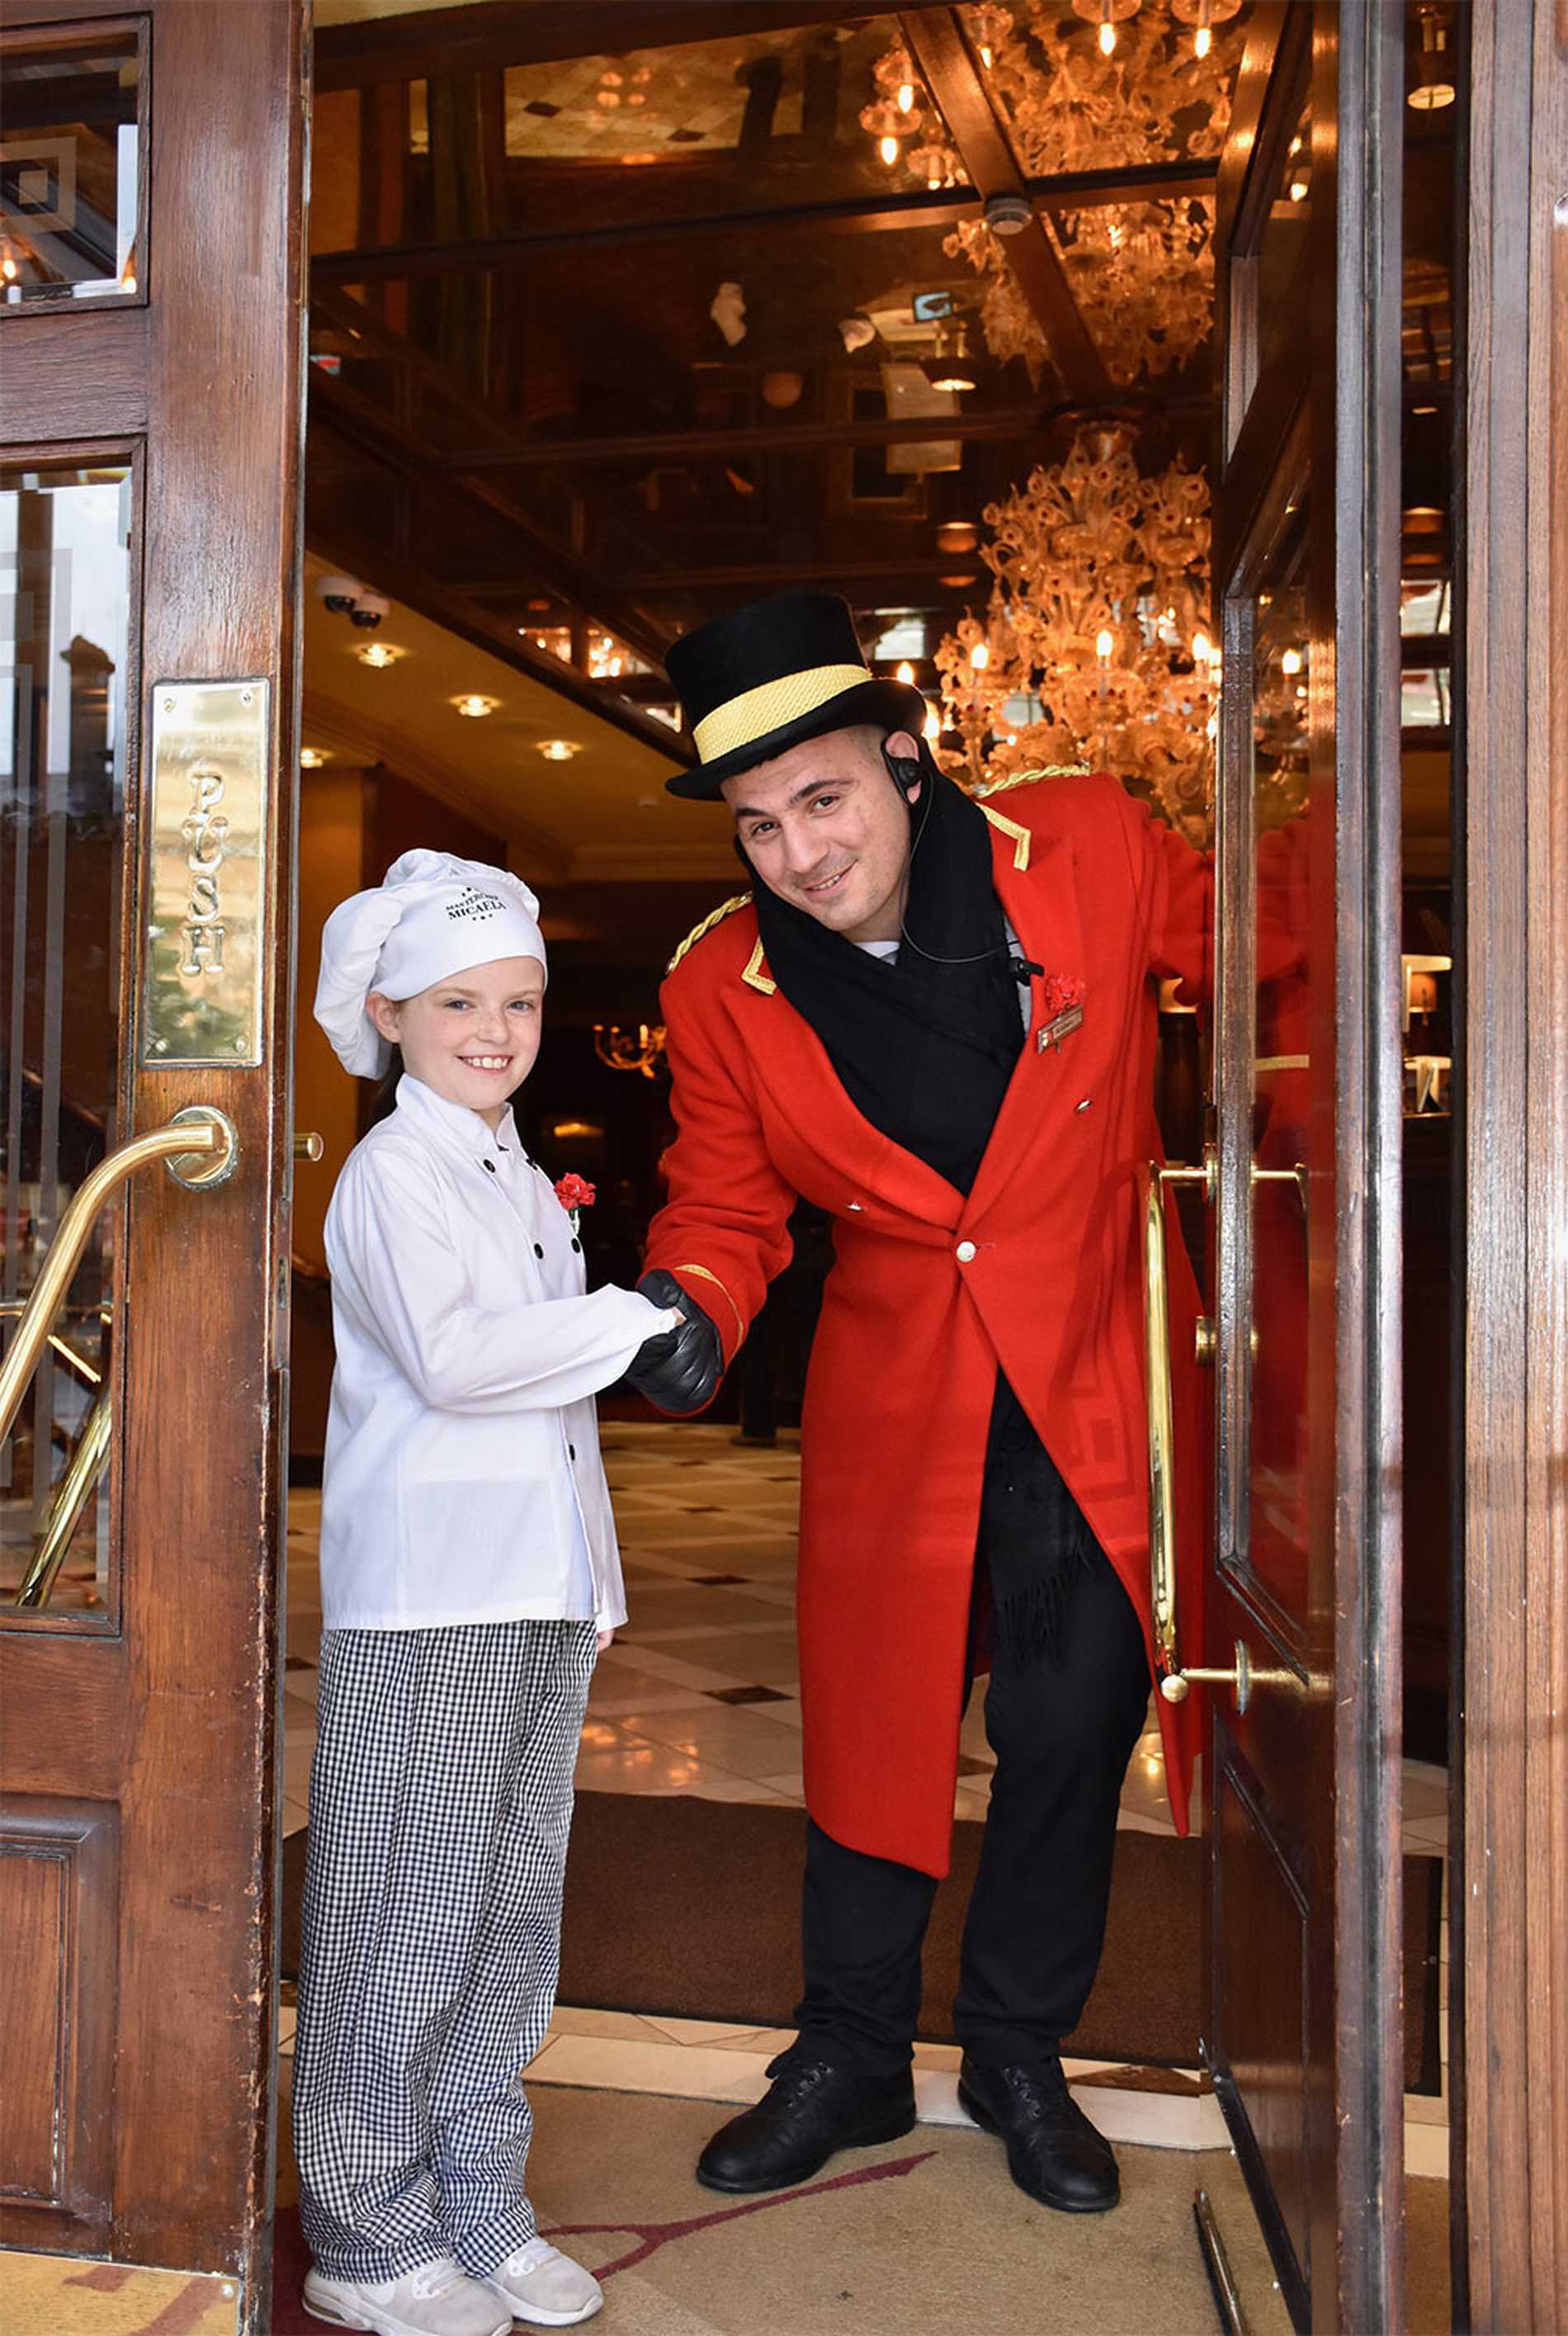 A smiling Micaela shaking the hand of a Reubens Hotel Doorman.